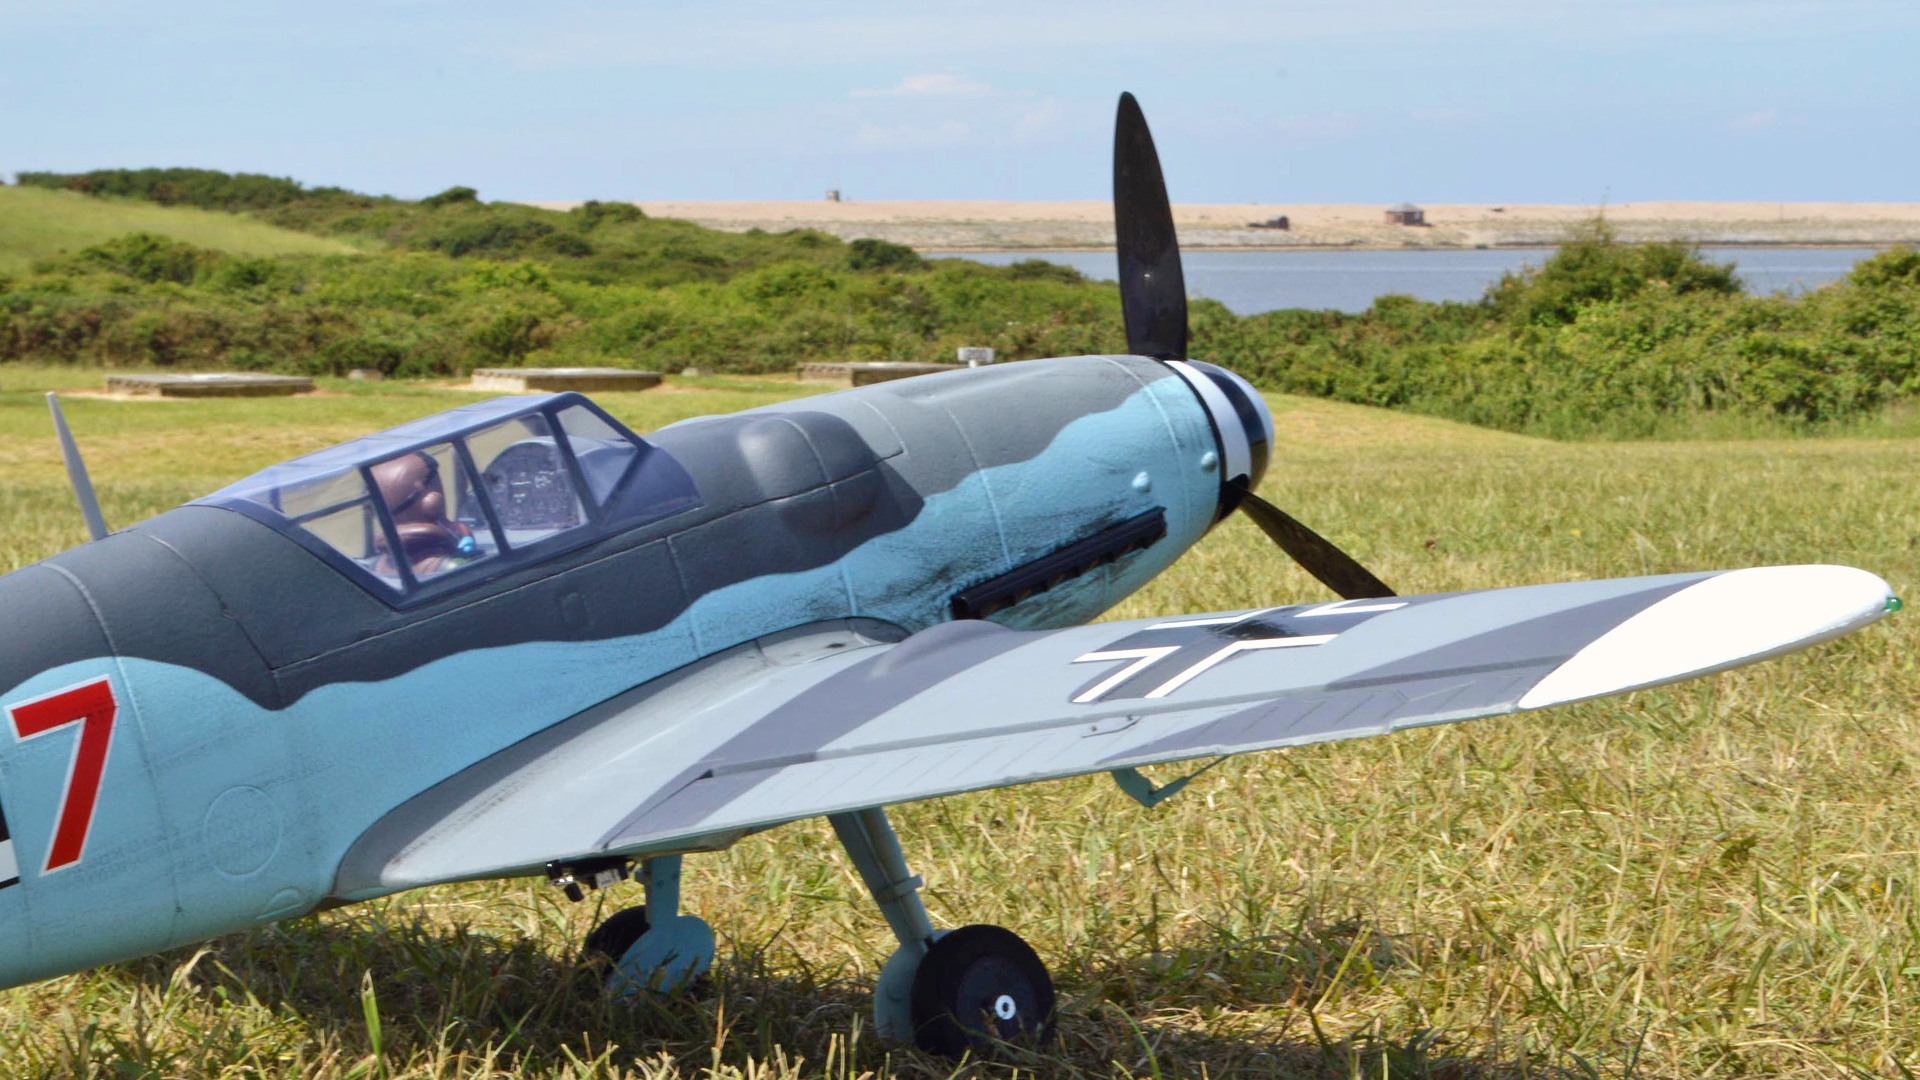 Manners McDade’s Tim Atak Scores New C4 Battle Of Britain: Model Squadron Series